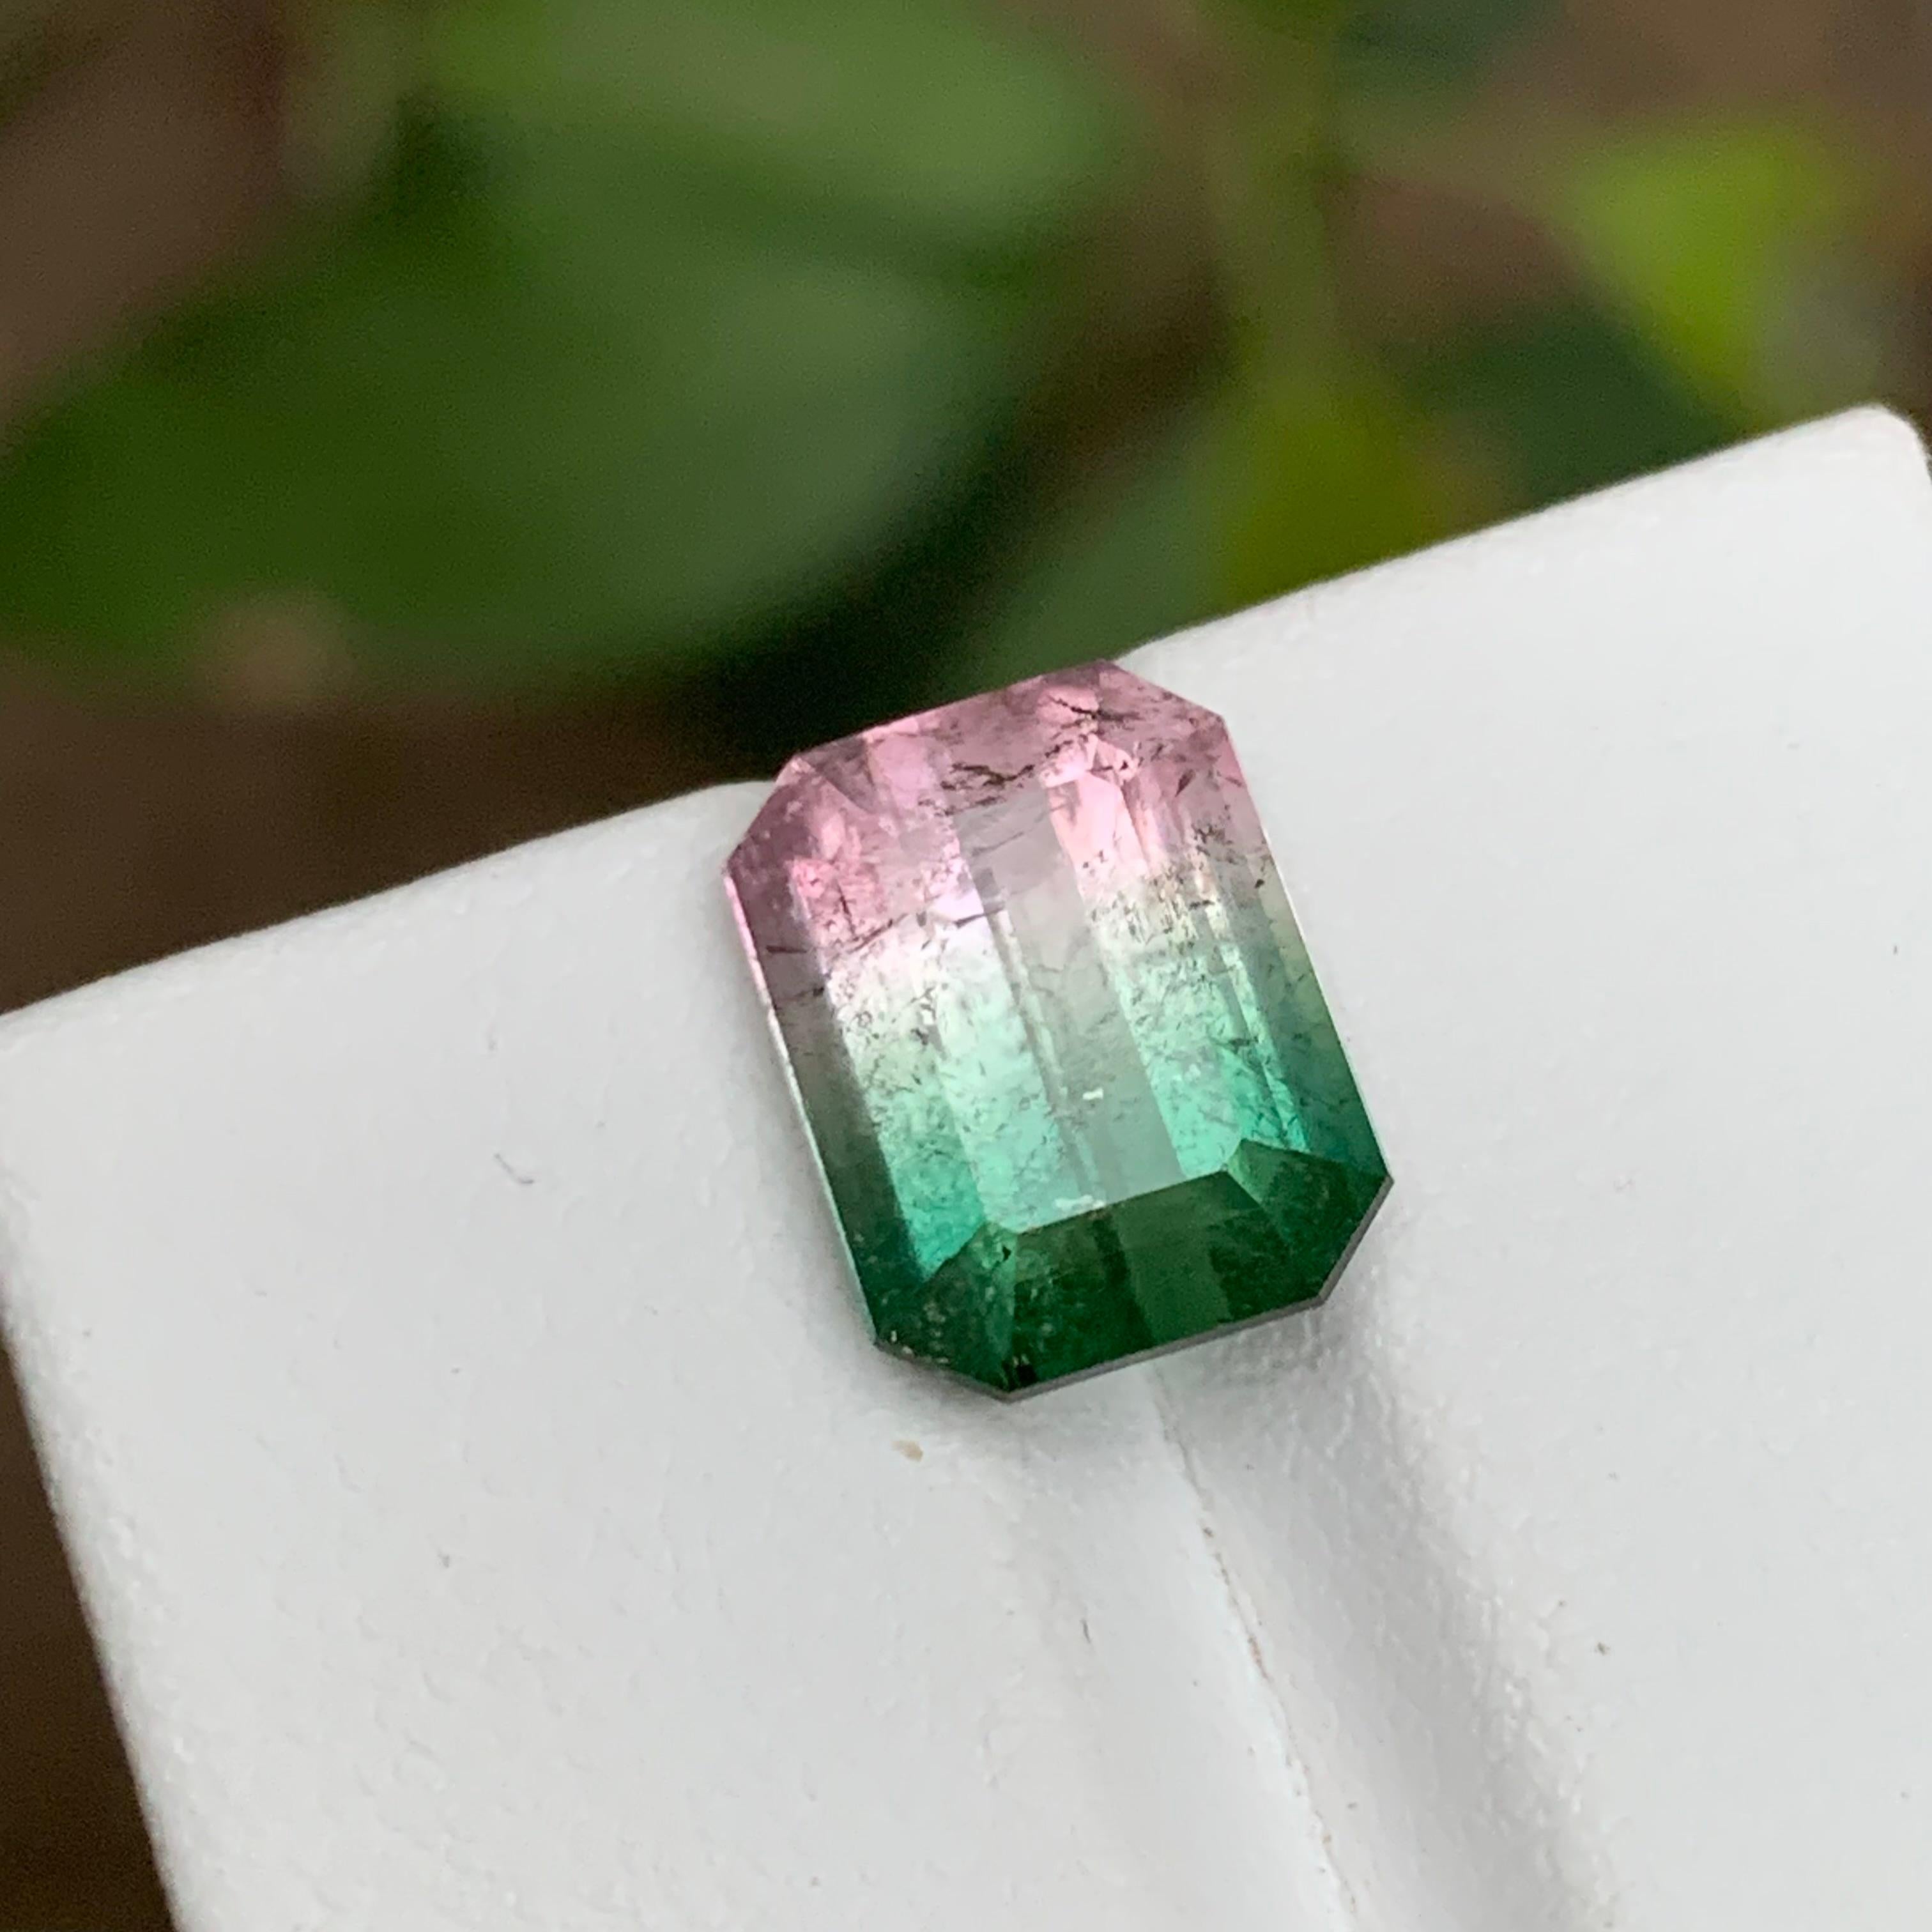 Contemporary Rare Bicolor Watermelon Bluish Green & Pink Tourmaline Gemstone 5.90 Ct for Ring For Sale